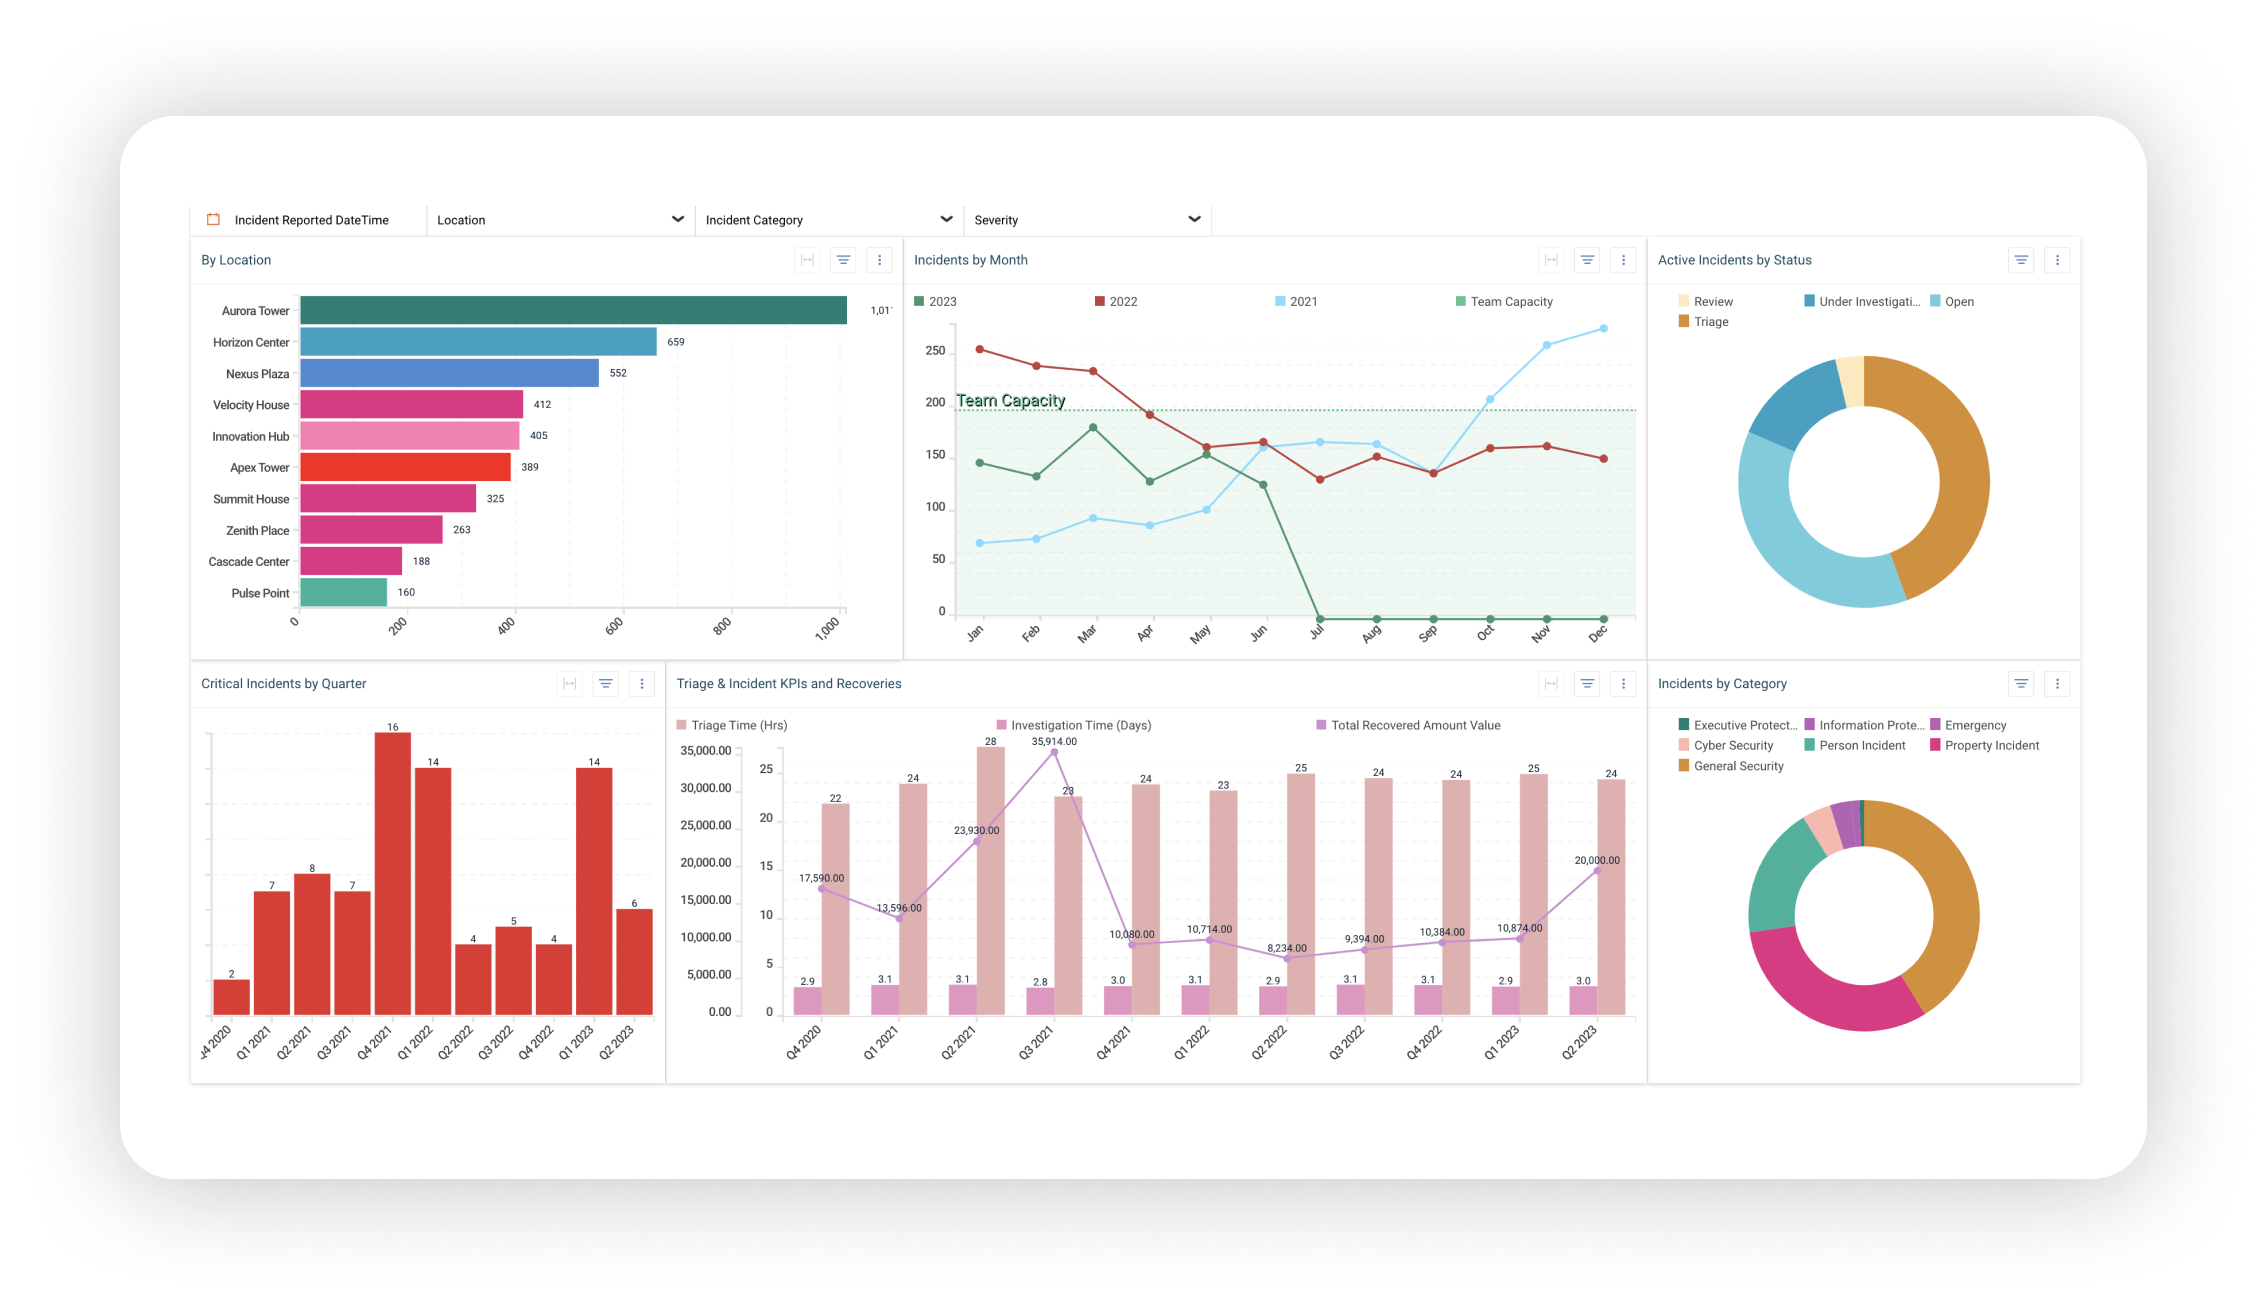 Incident Management Overview Dashboard